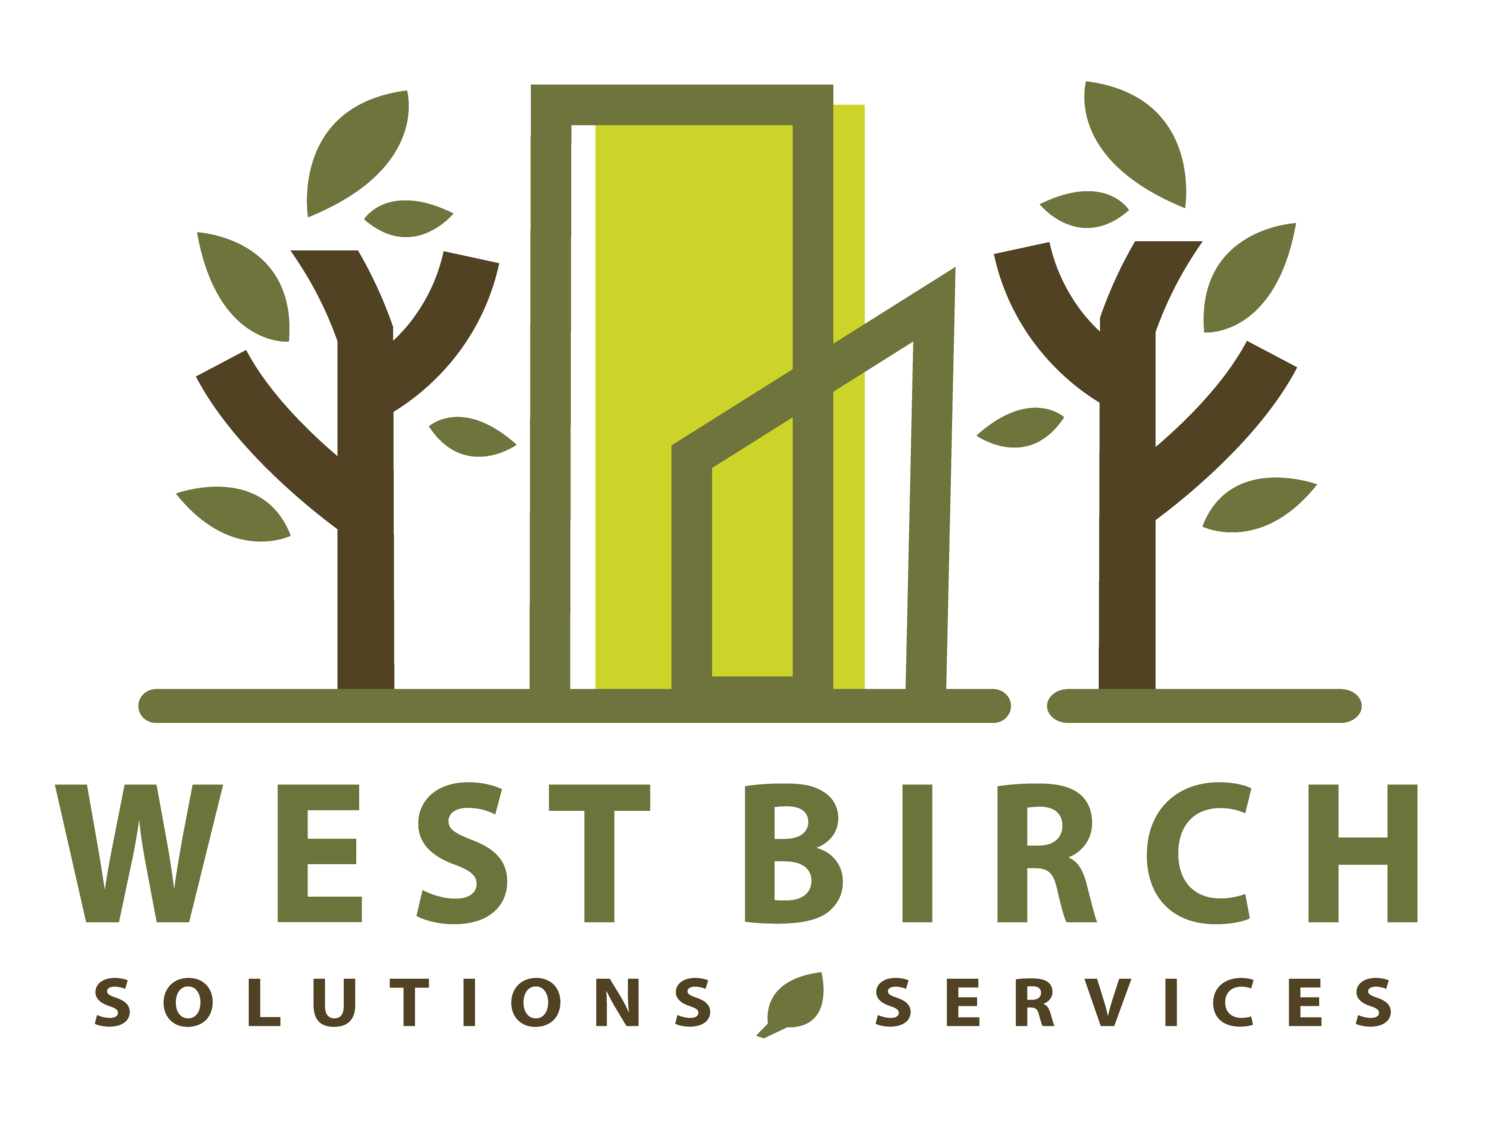 West Birch solutions and services